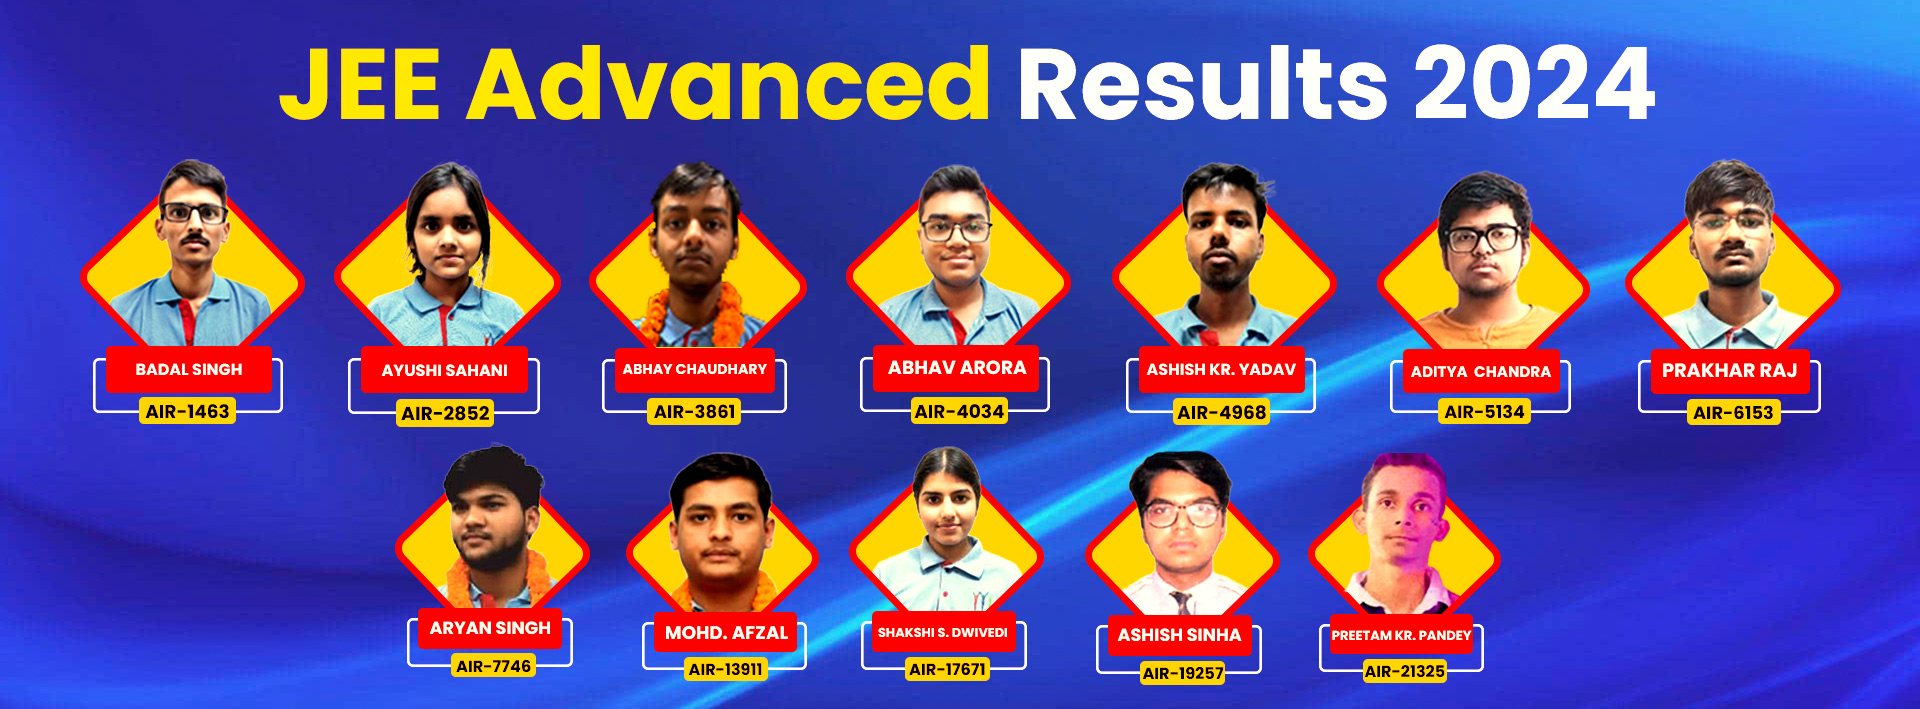 Jee Advanced Results 2024